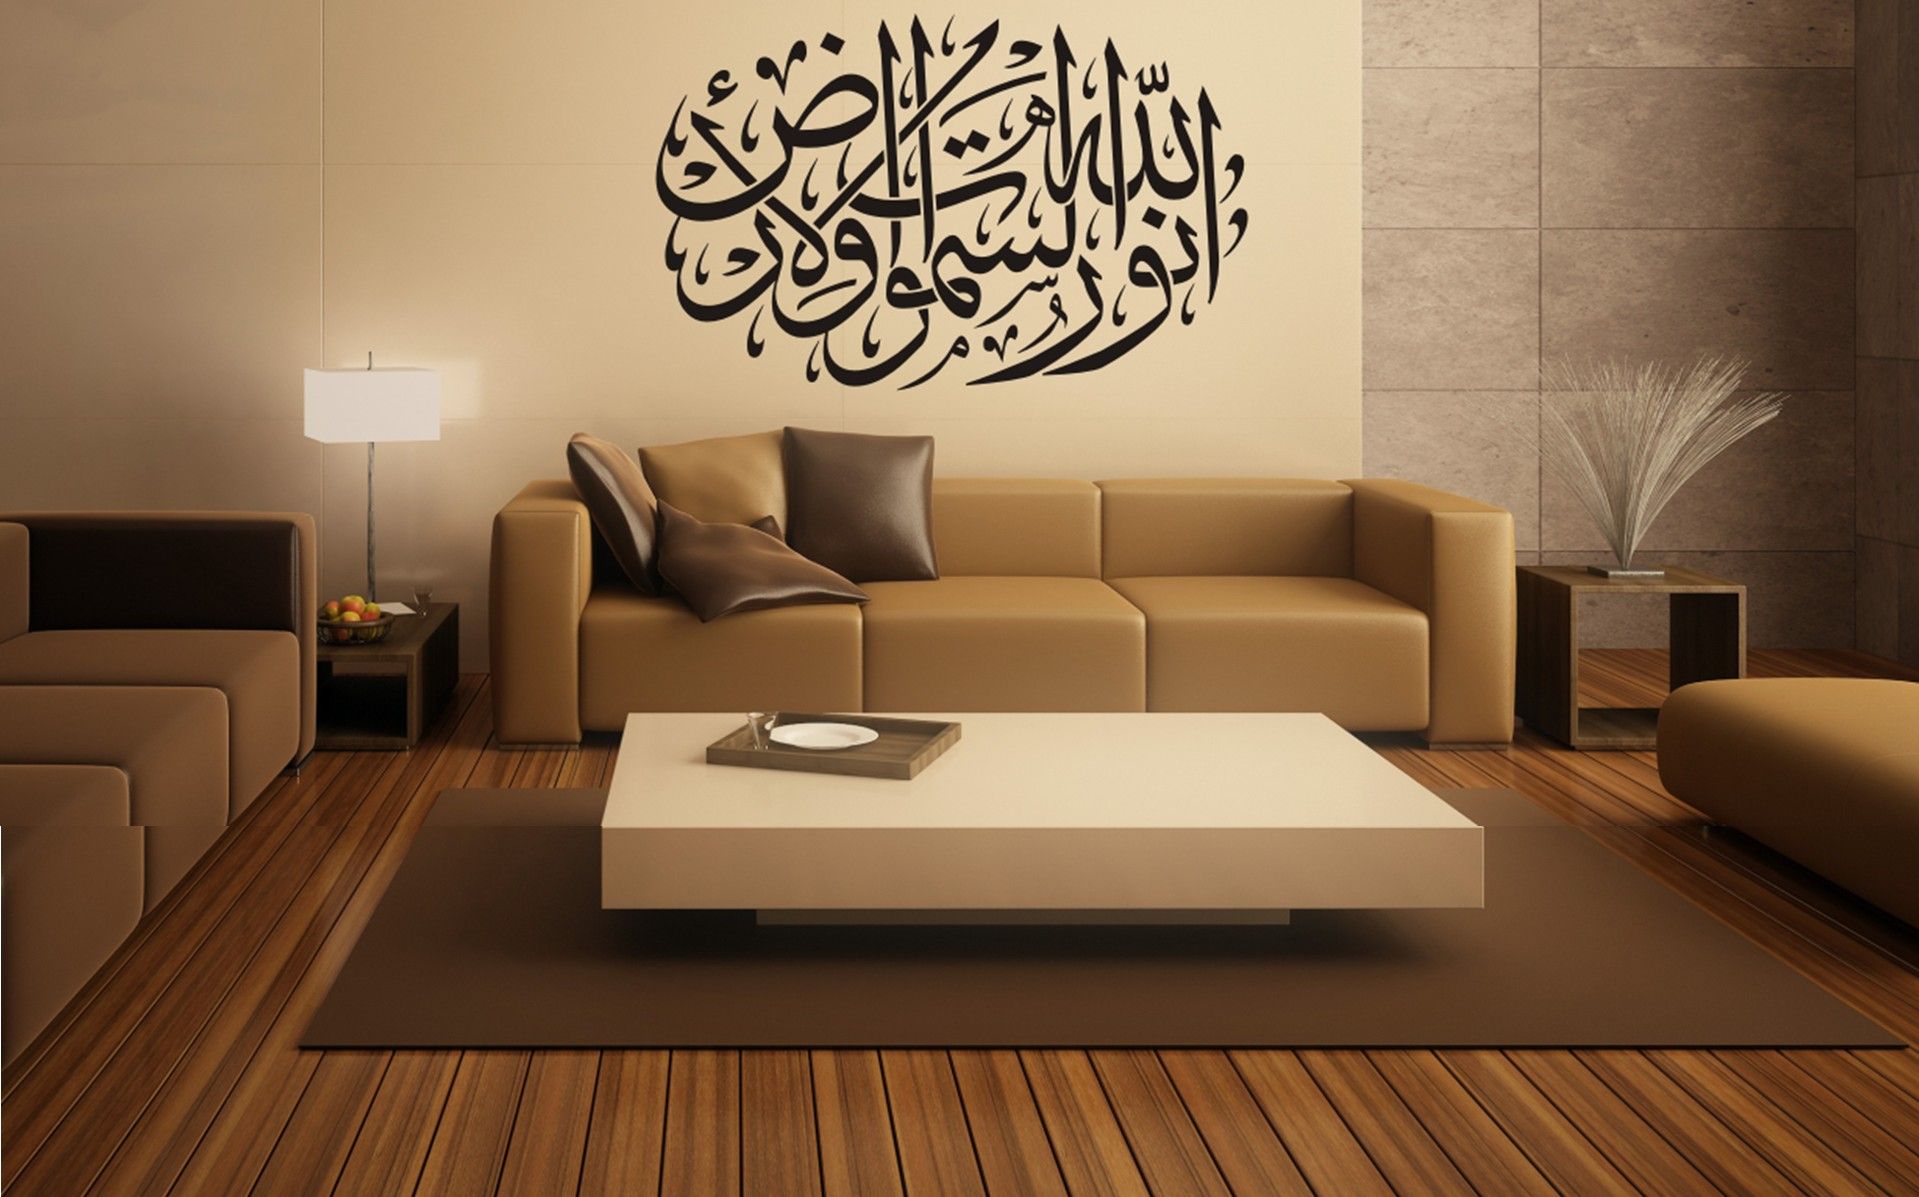 Google Image Result for http://www.arabiccalligraphy.com/static/2011 ...